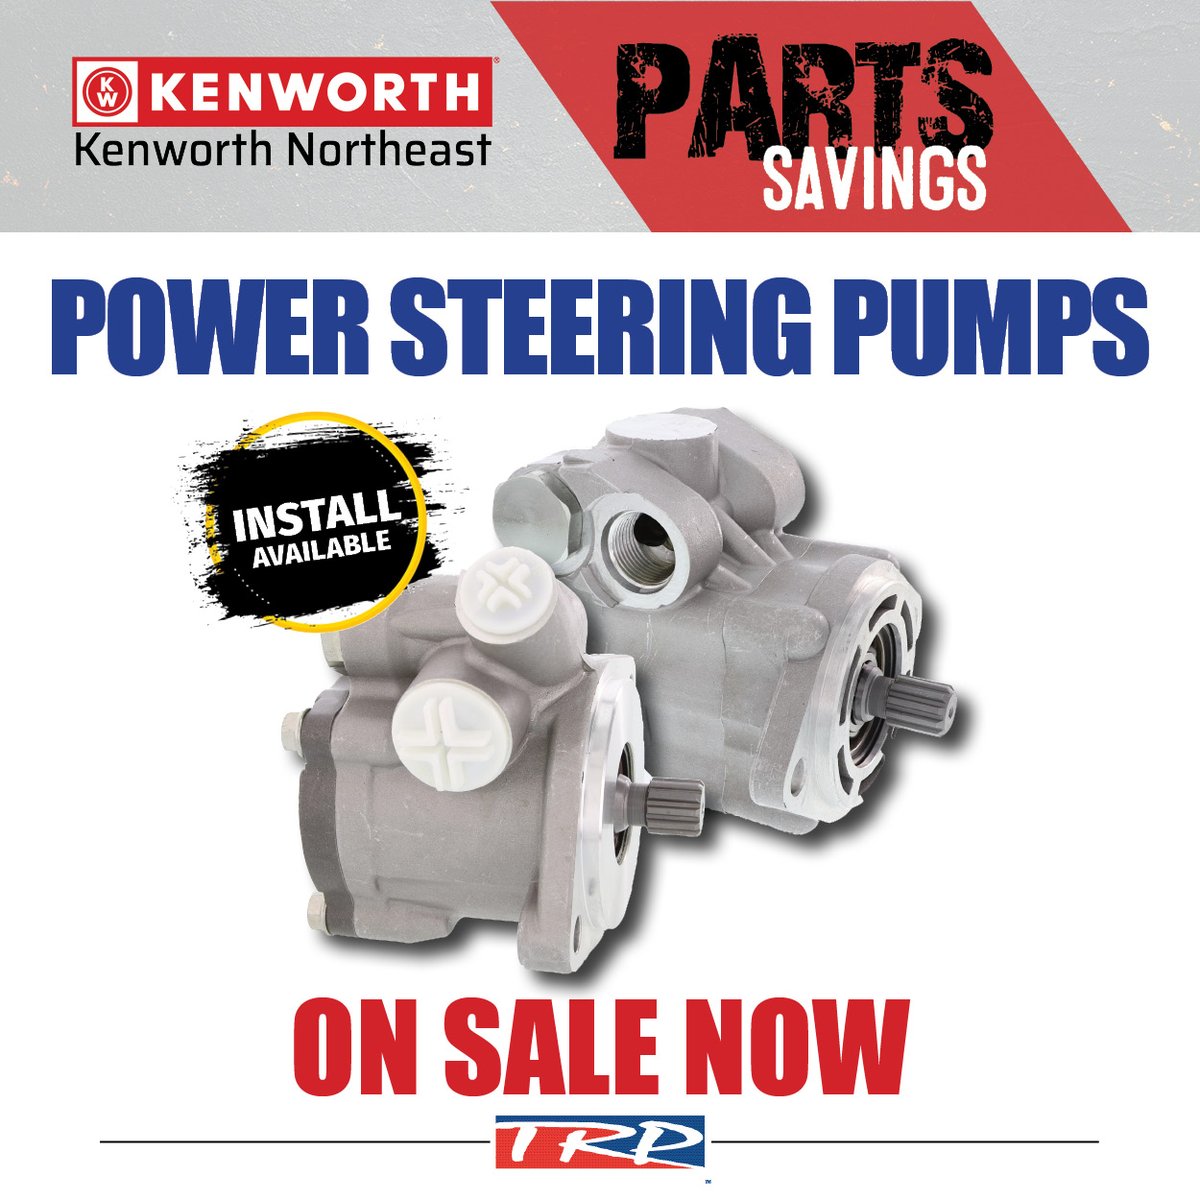 Summer has arrived and so have our June deals on heavy duty truck parts, including power steering pumps! Call 800-211-2580 to place an order and find more savings at hubs.la/Q01SF05N0
#truckparts #commercialtruckparts #fleetmaintenance #fleetmanager #owneroperator